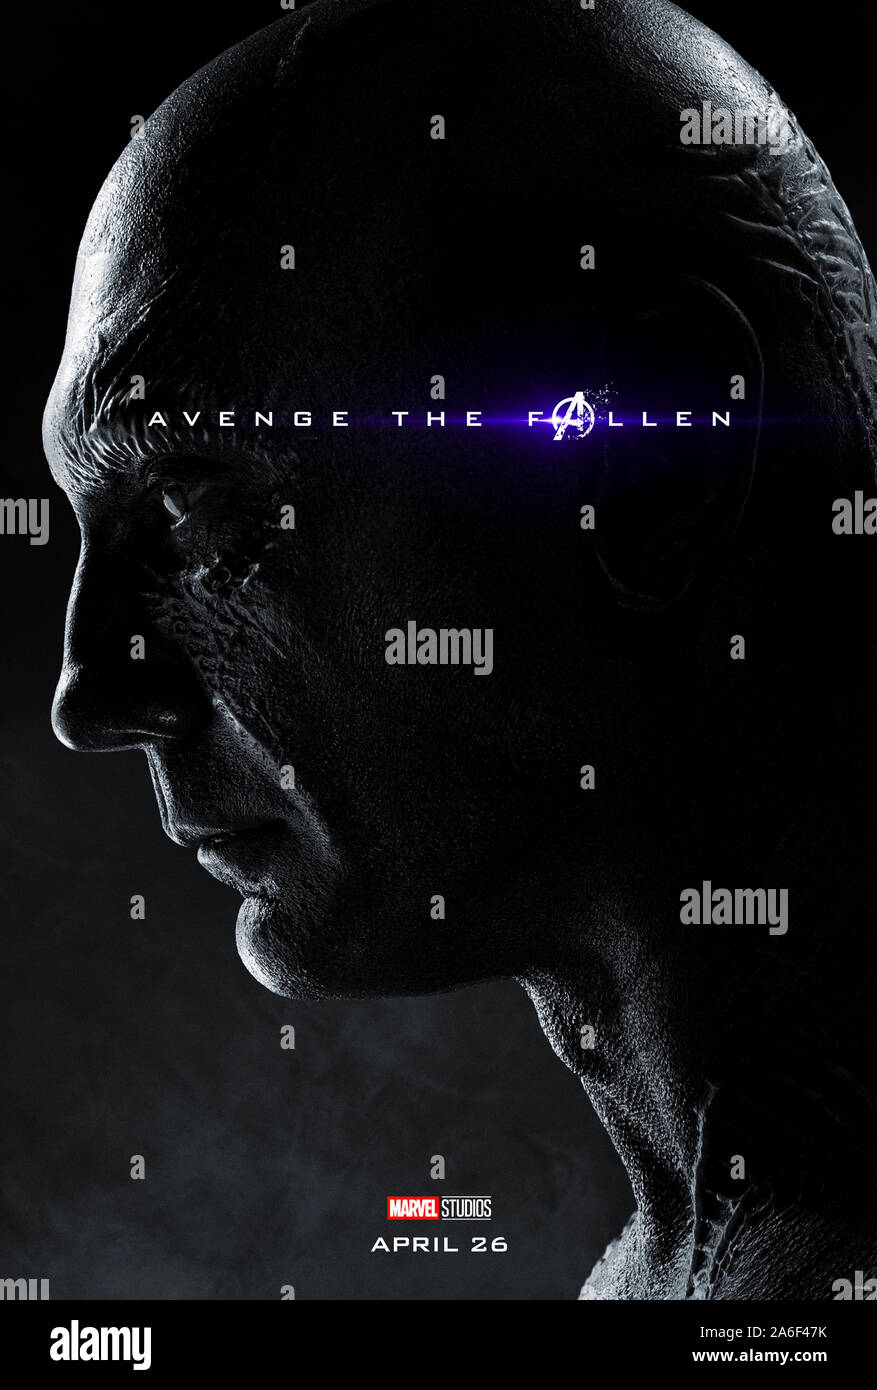 Character advance poster for Avengers: Endgame (2019) directed  by Anthony and Joe Russo starring Dave Bautista as Drax the Destroyer. The epic conclusion and 22nd film in the Marvel Cinematic Universe. Stock Photo